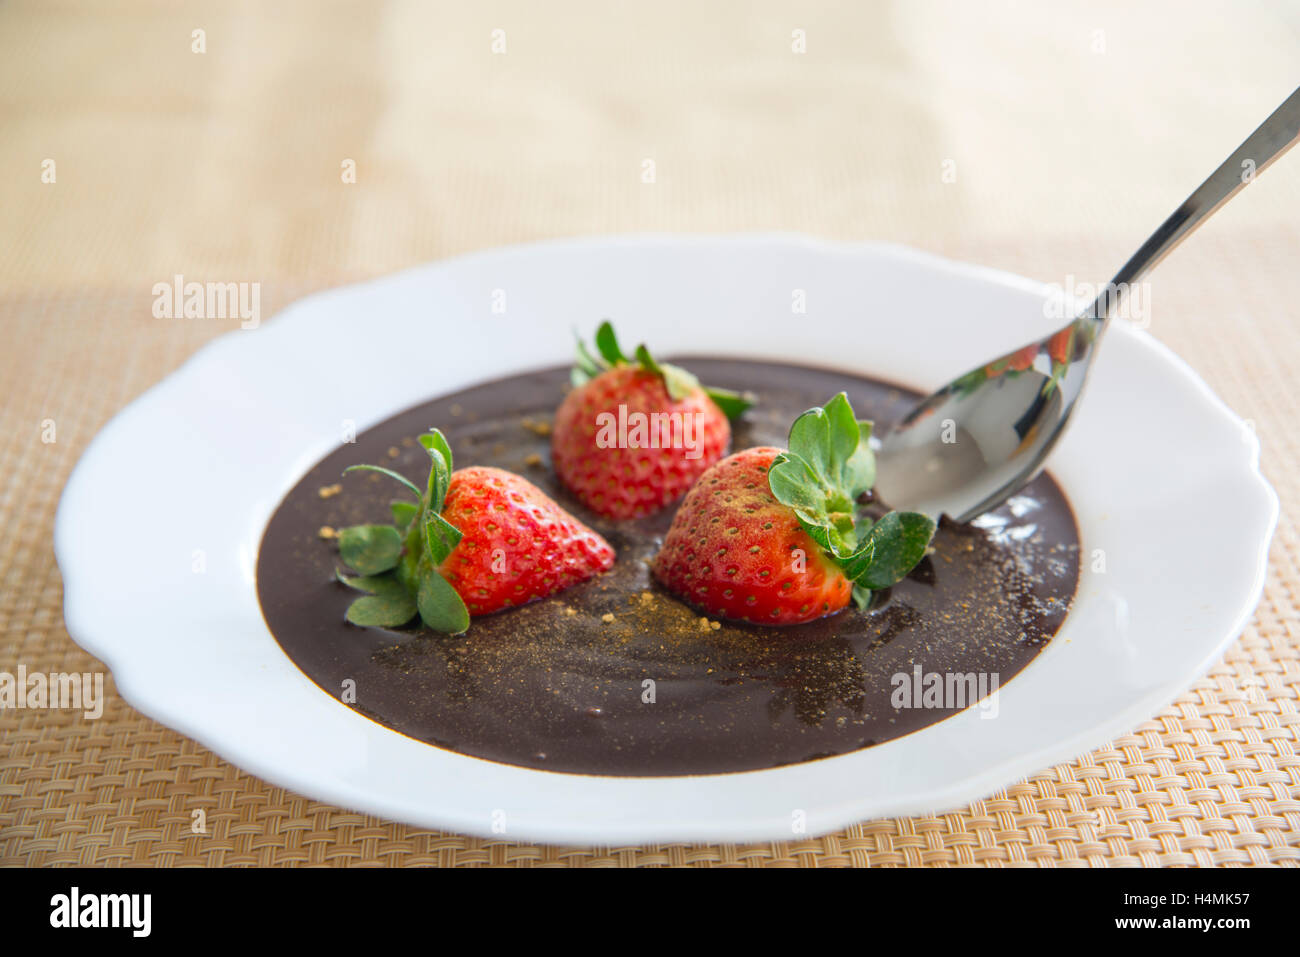 Chocolate cream with strawberries and ginger. Close view. Stock Photo